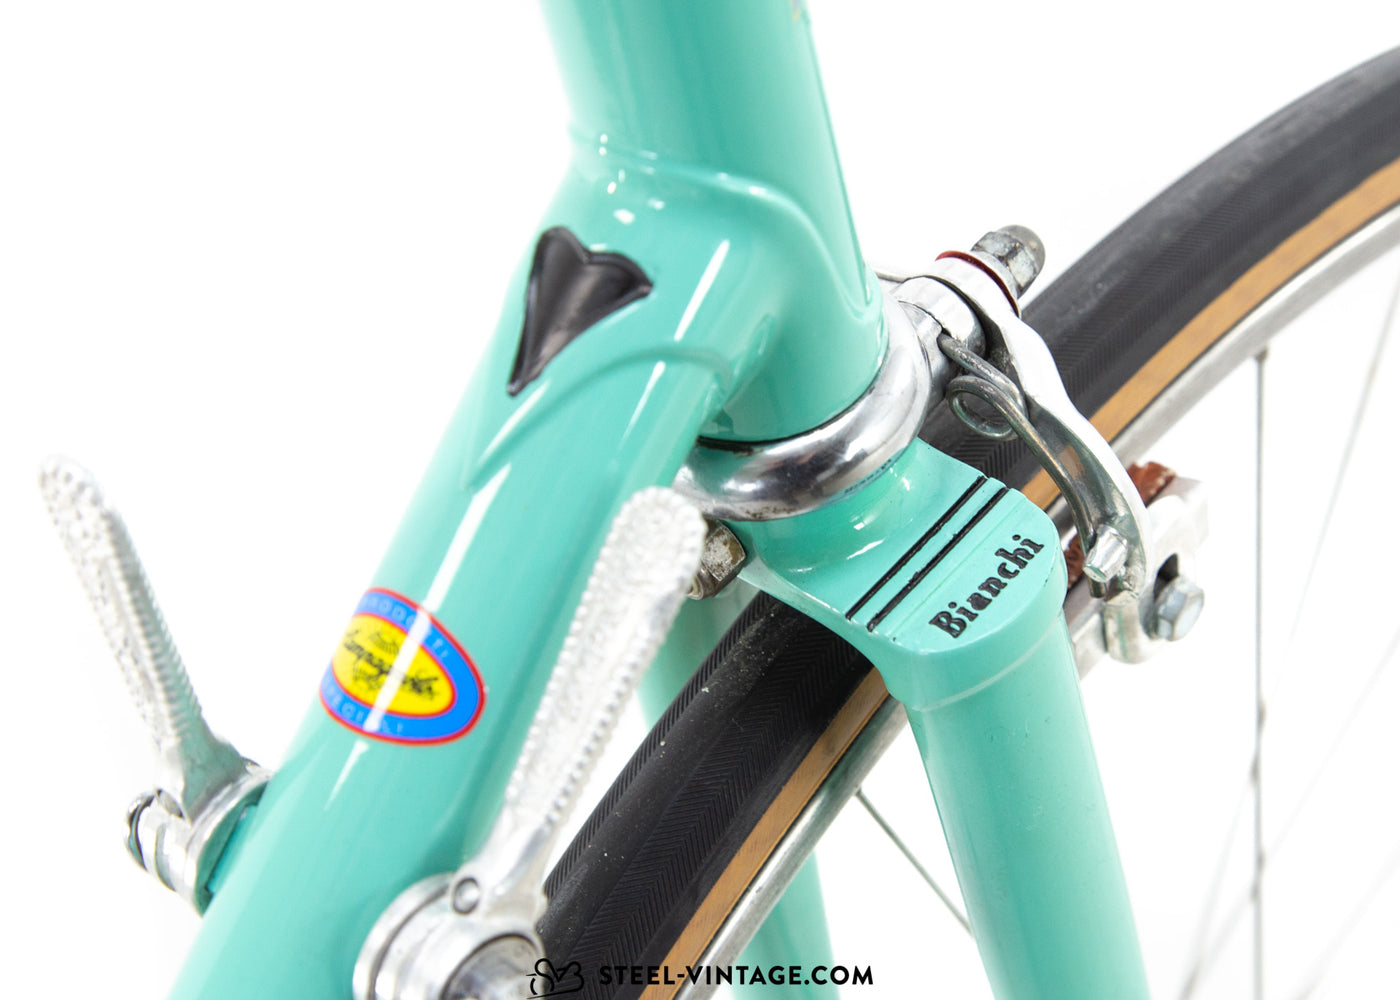 Bianchi Sprint Road Bicycle 1970s